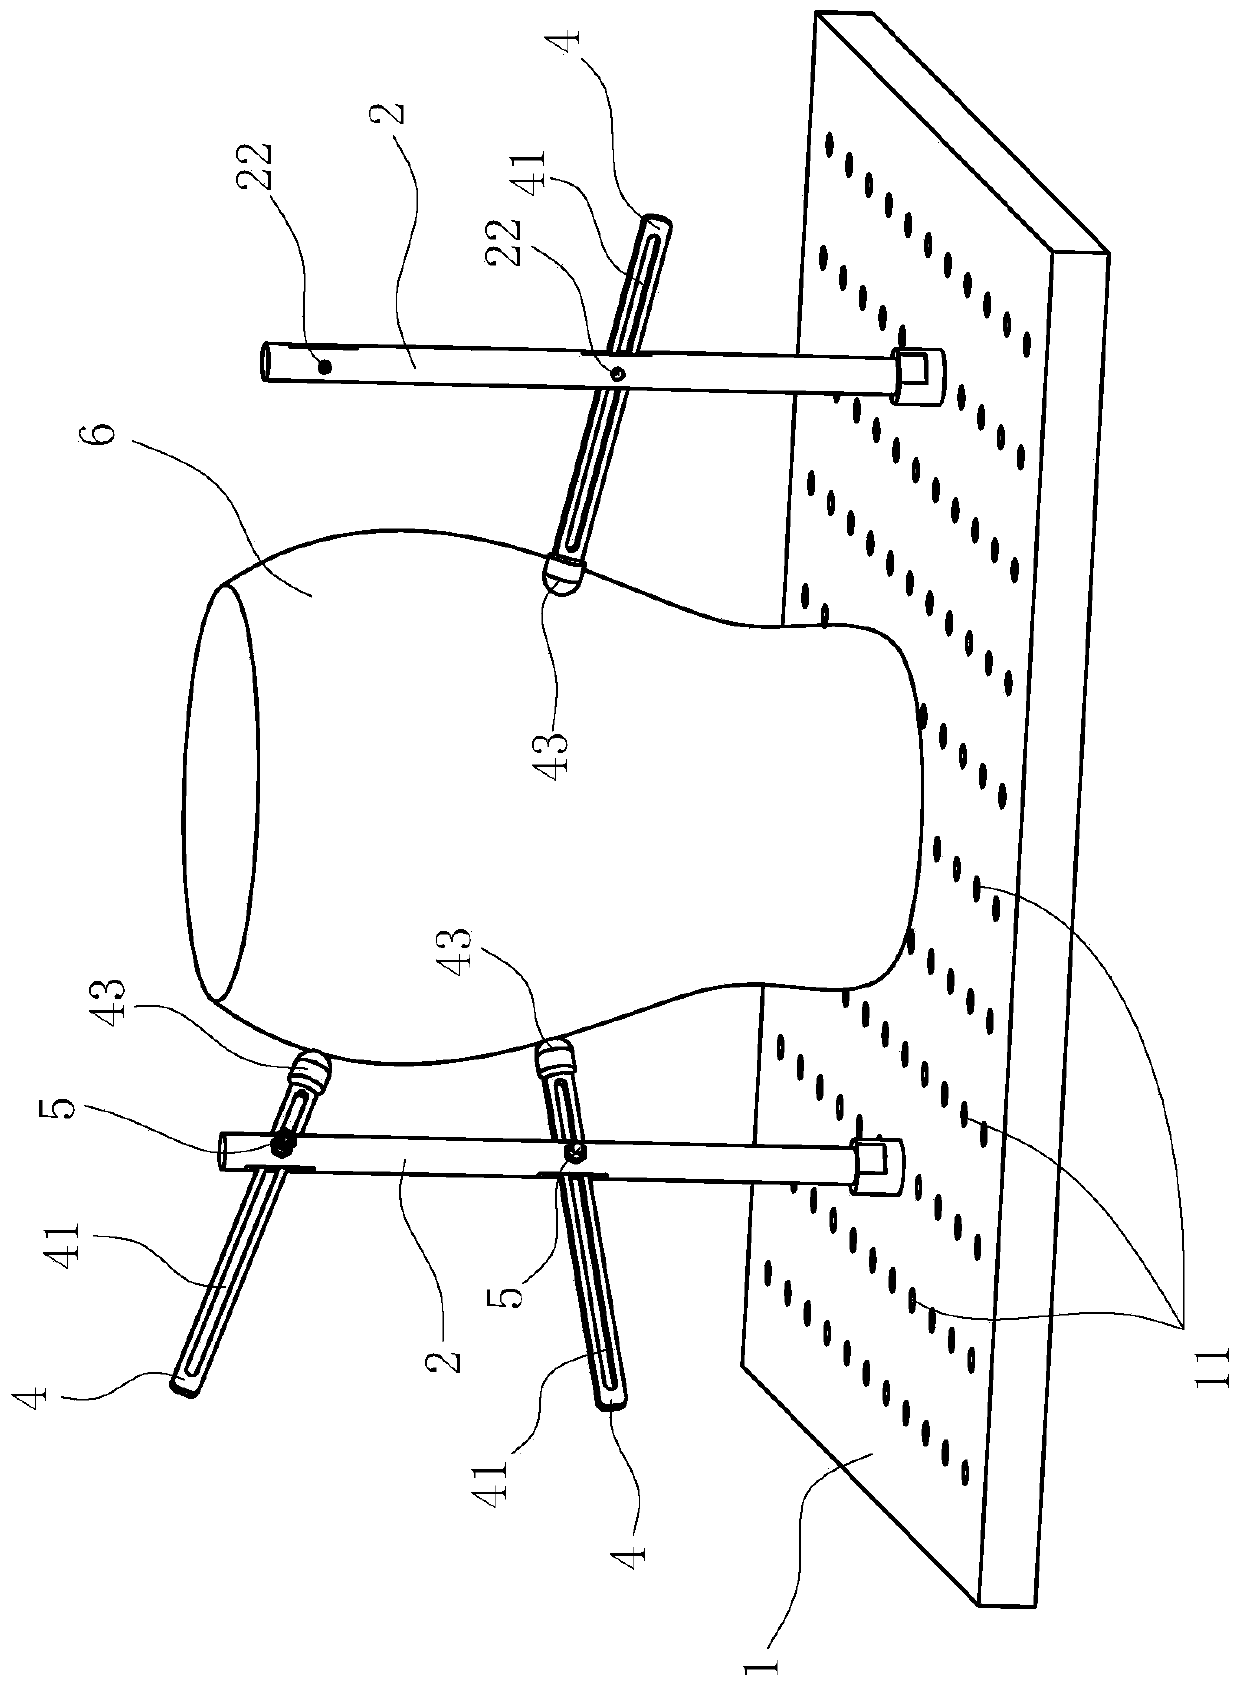 Supporting device for three-dimensional exhibit